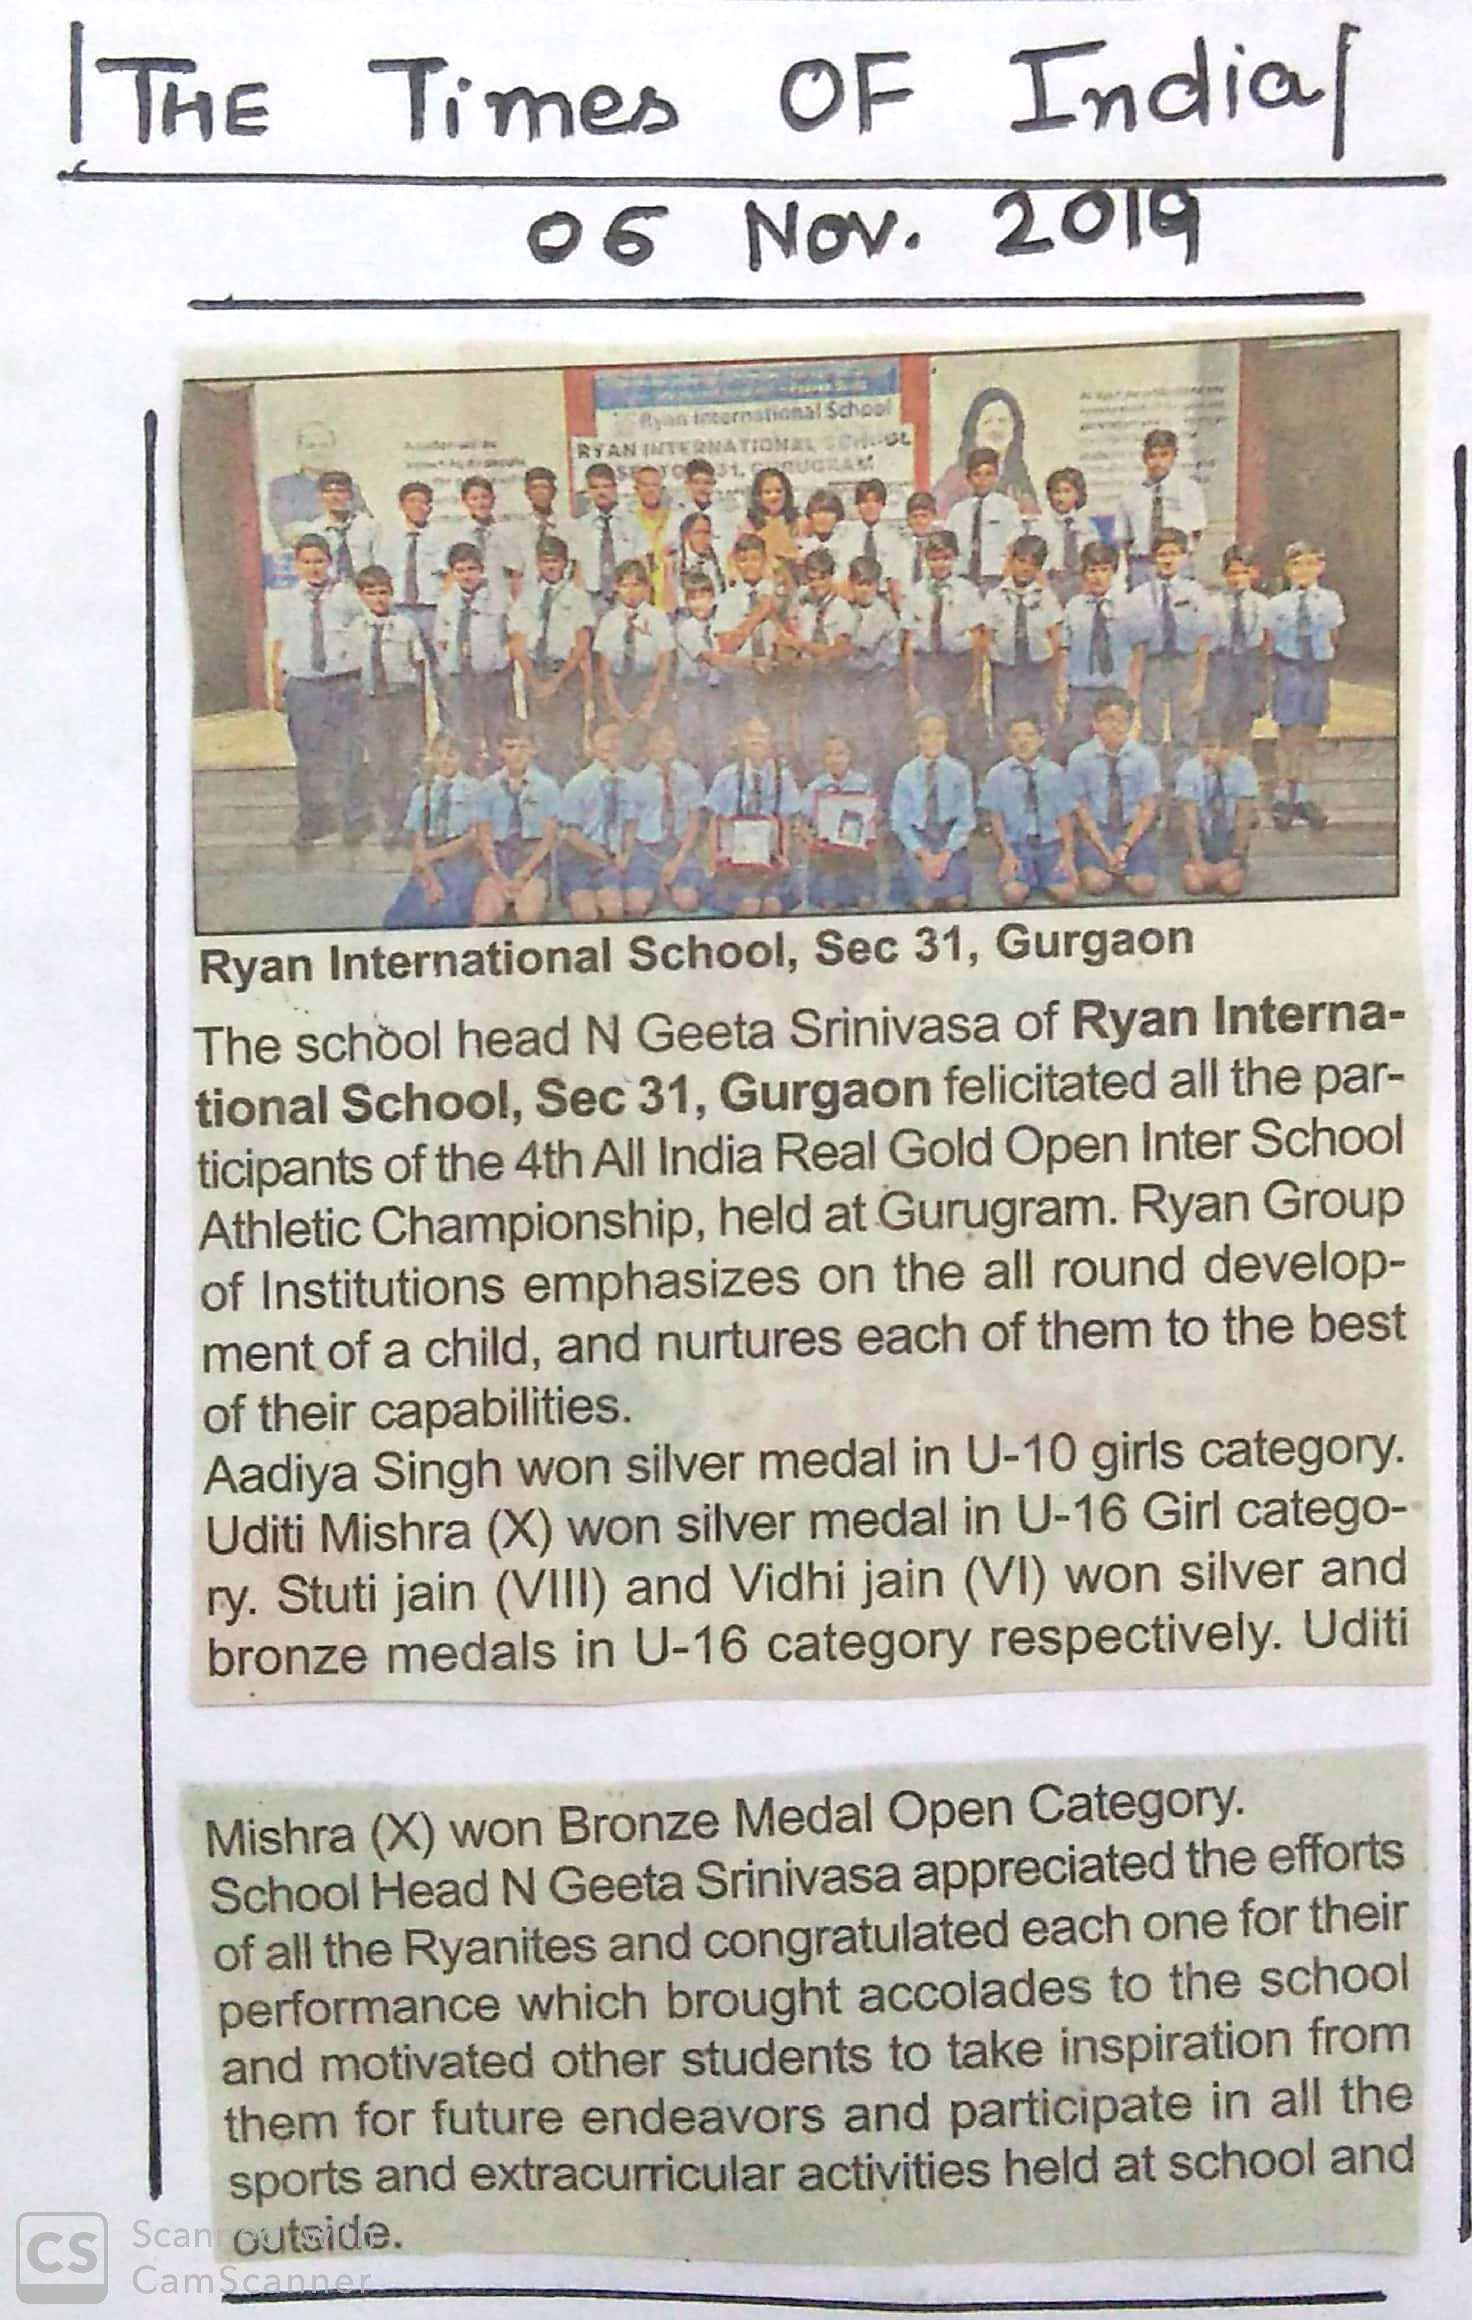 All the participants of the 4th All India Real Gold Open Interschool Athletic Championship were felicitated by the school head Geeta Srinivasa